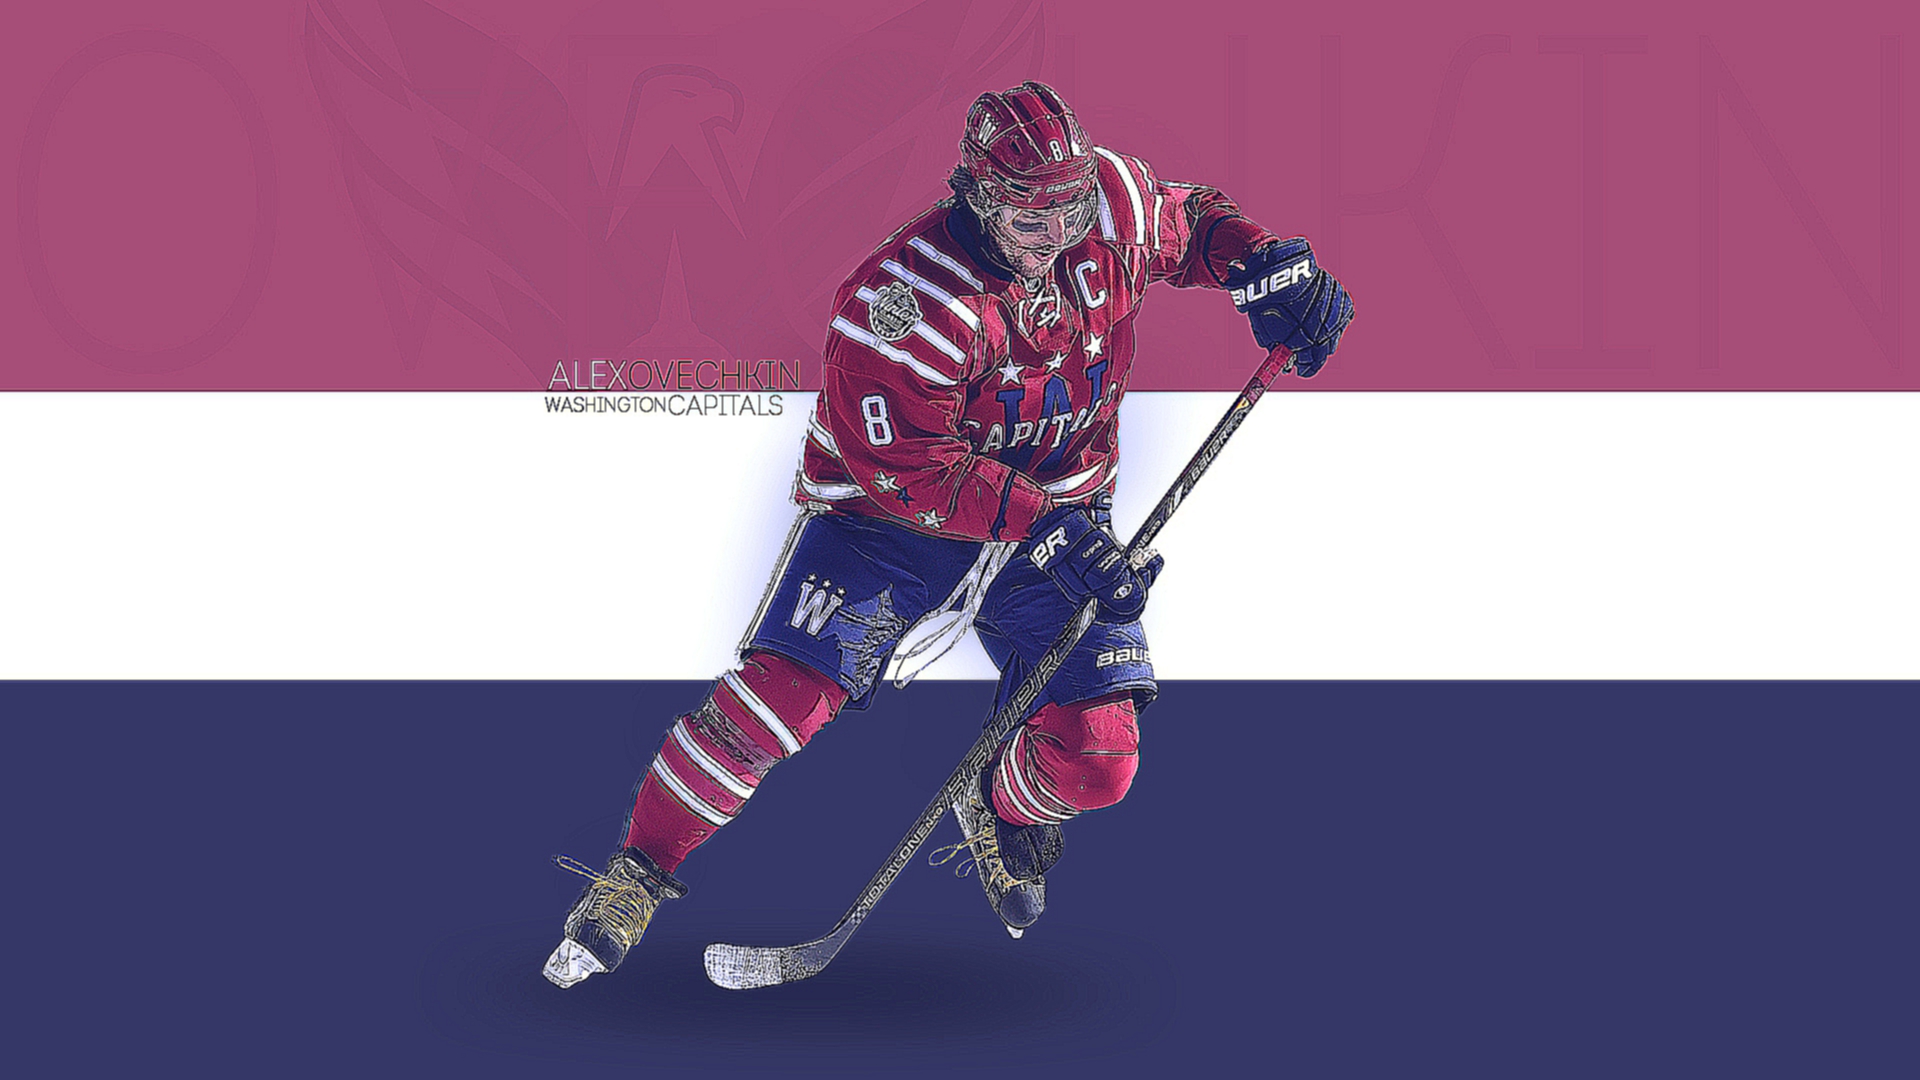 Washington Capitals wallpapers free download on Wallpapers Bros